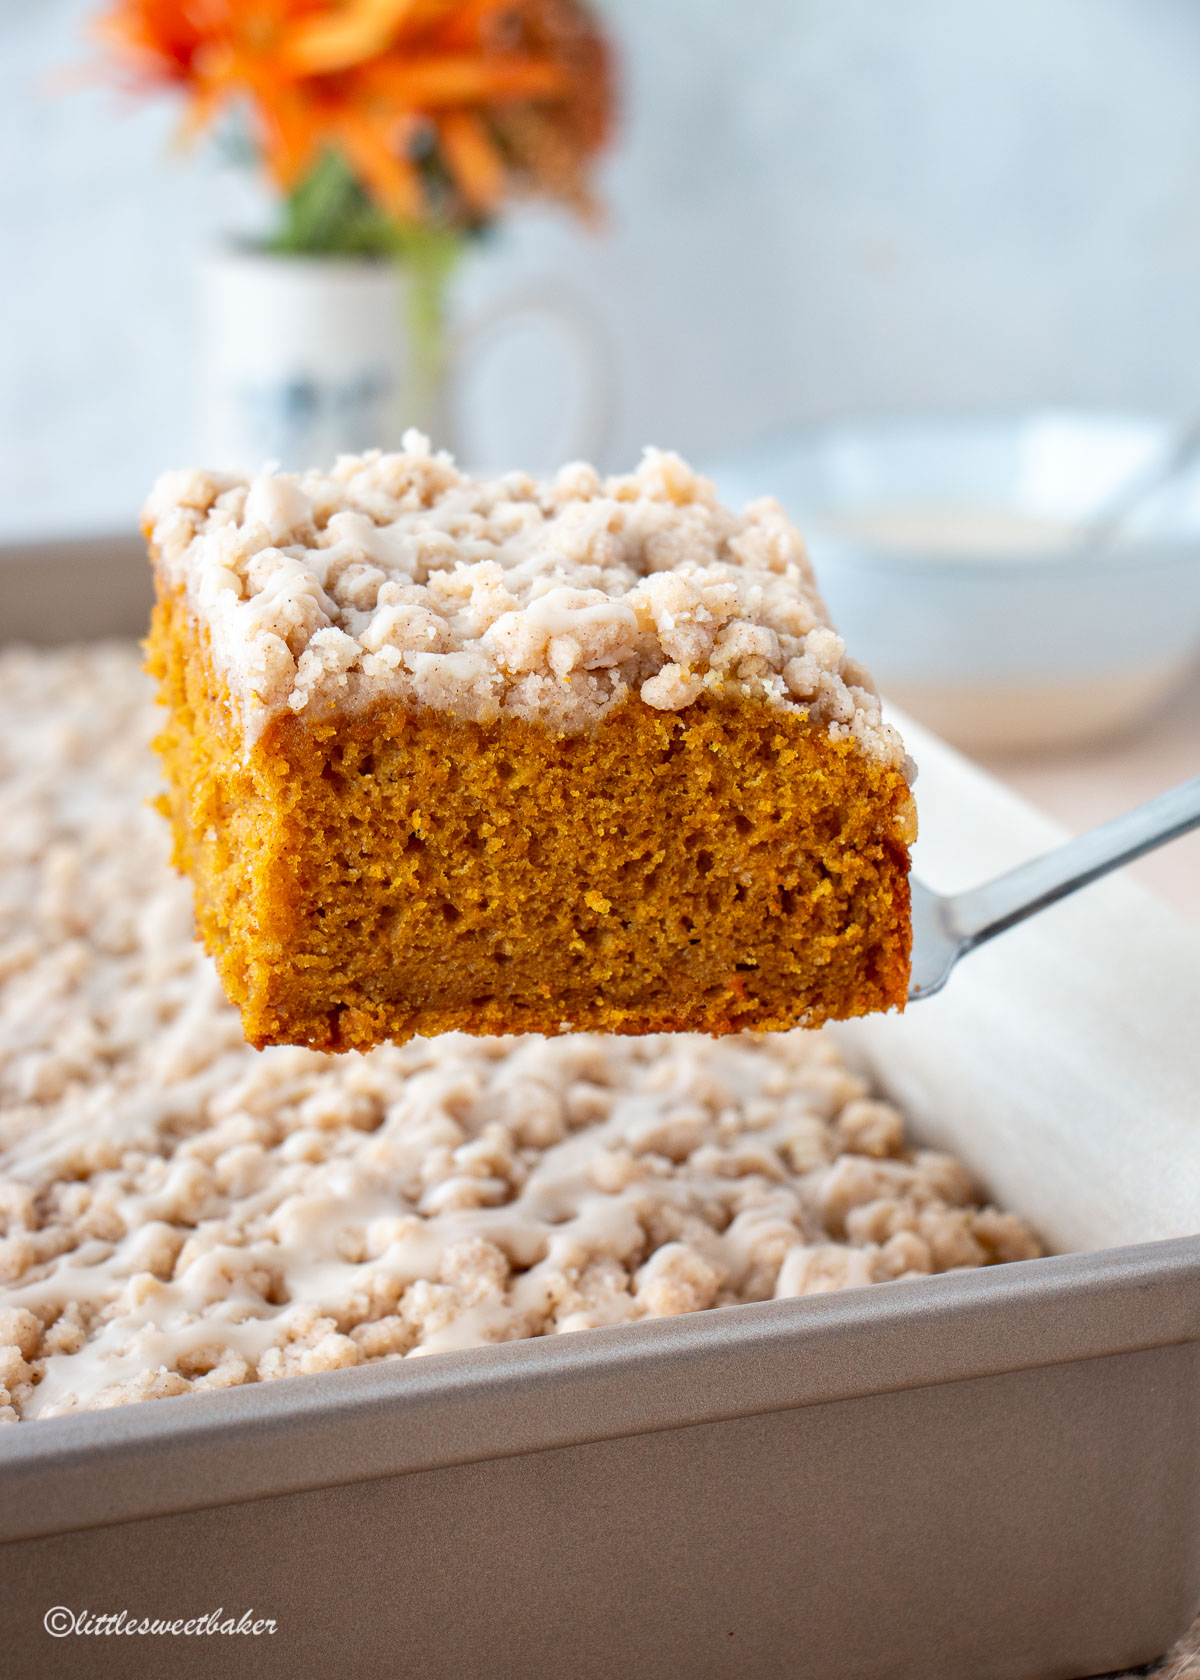 A slice of pumpkin coffee cake being lifted from rest of cake.